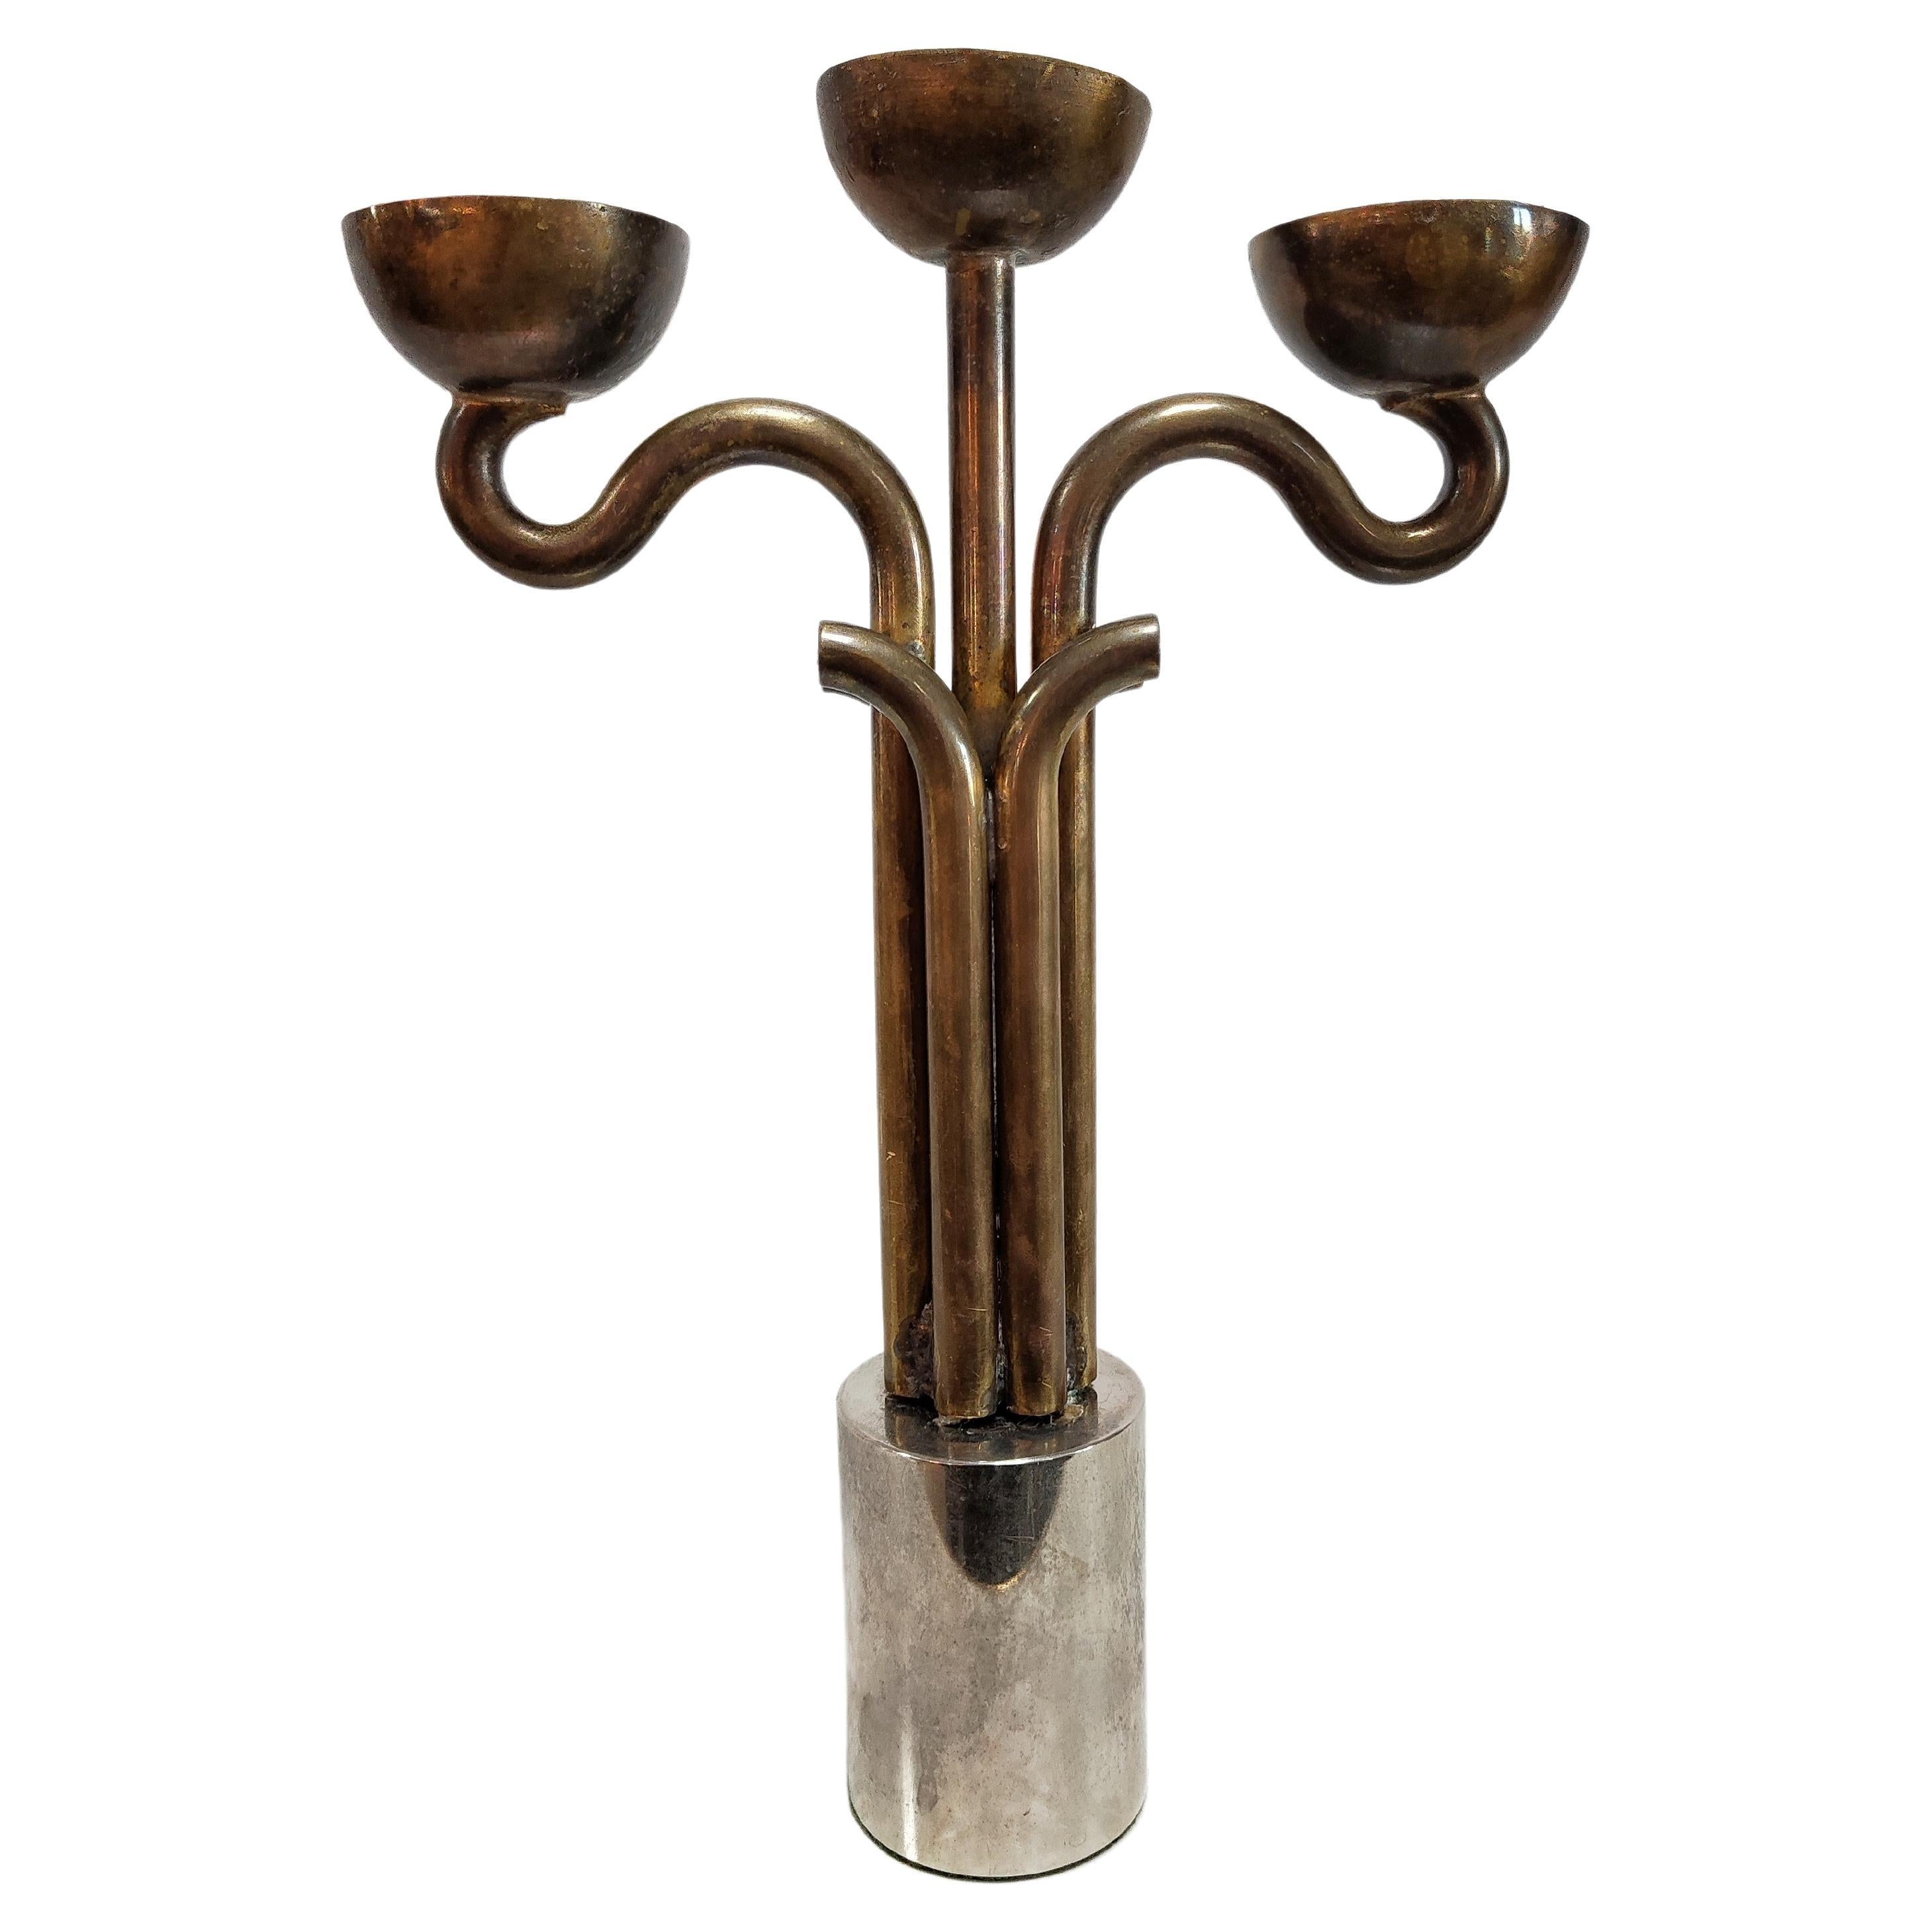 Brutalist Candlestick Holder Done in Brass and Nickel, Italy, 1970s For Sale